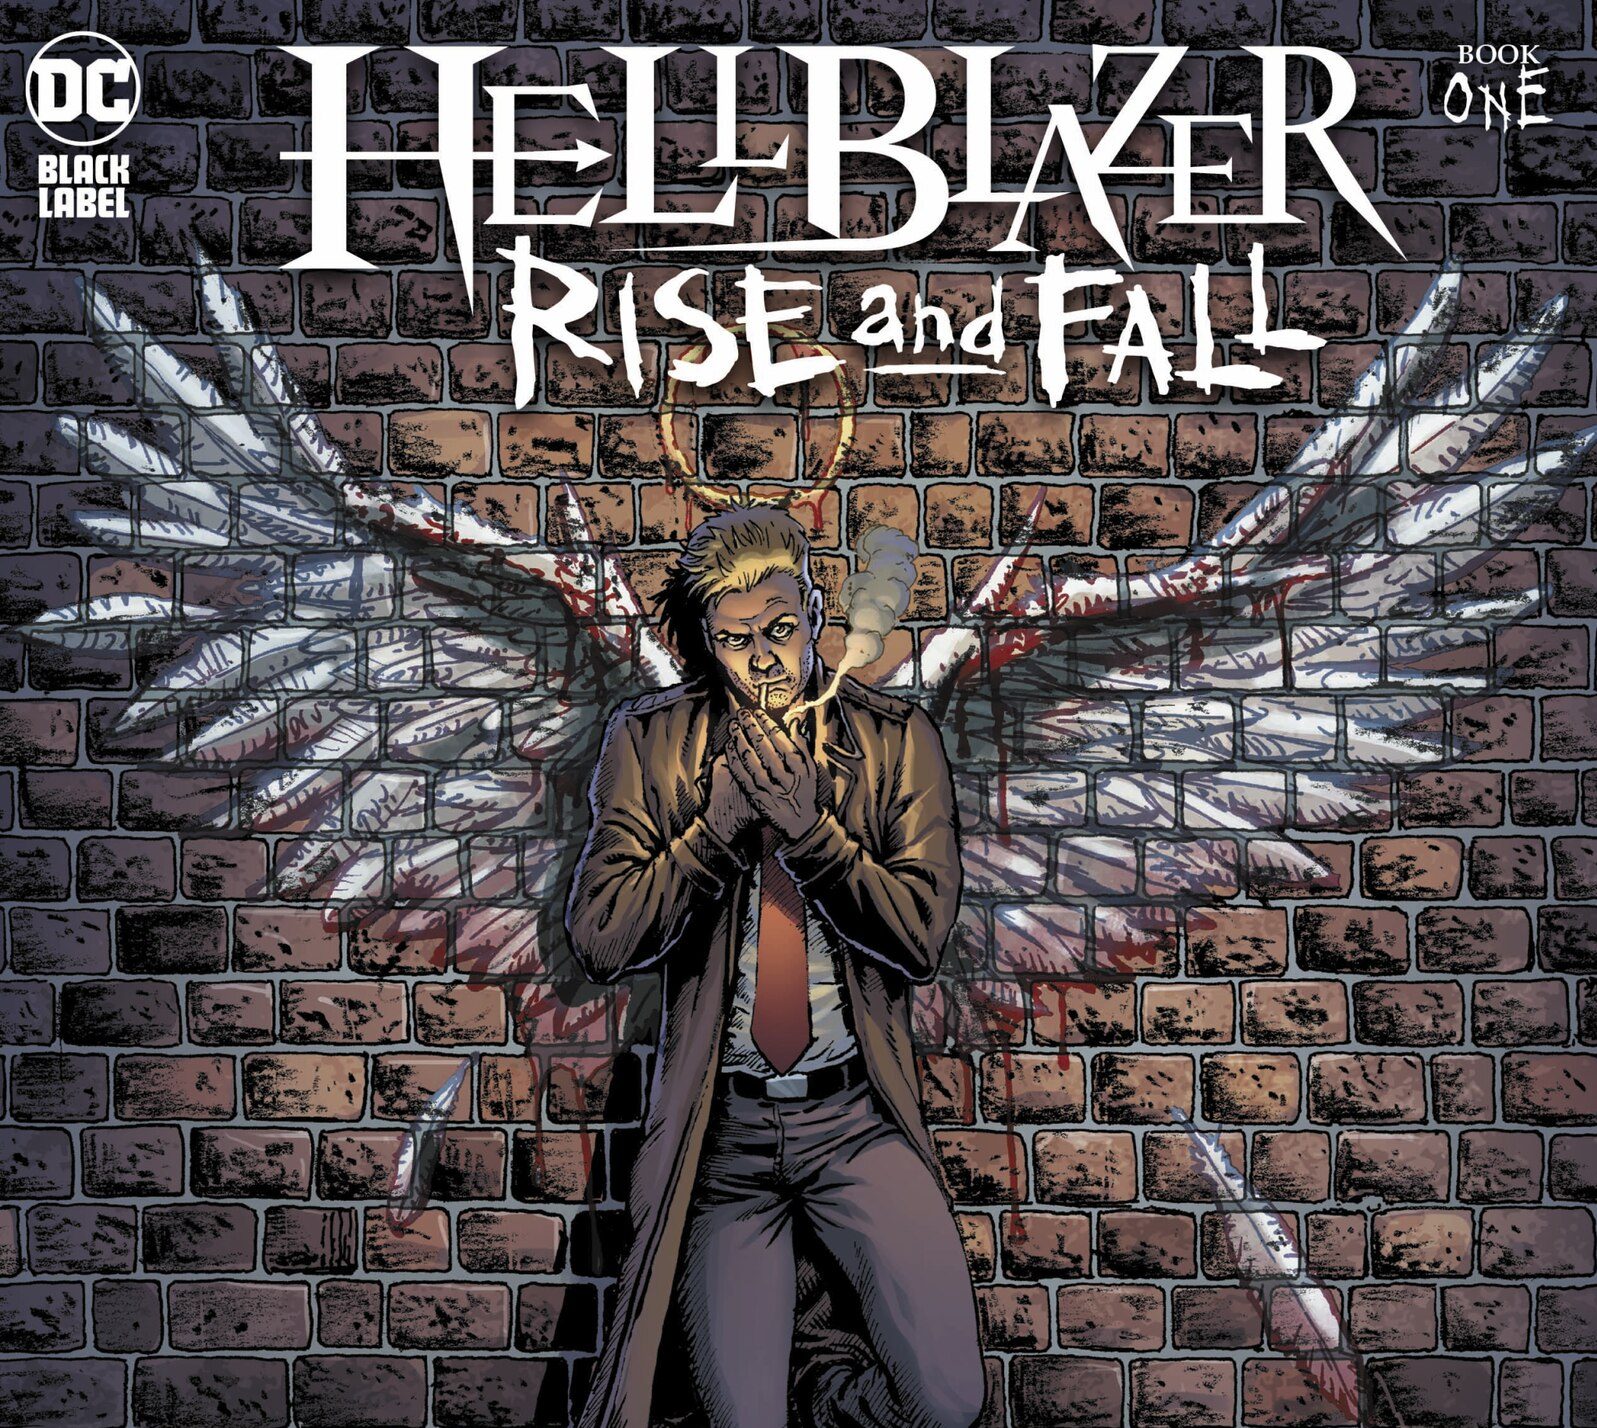 Hellblazer: Rise and Fall #1